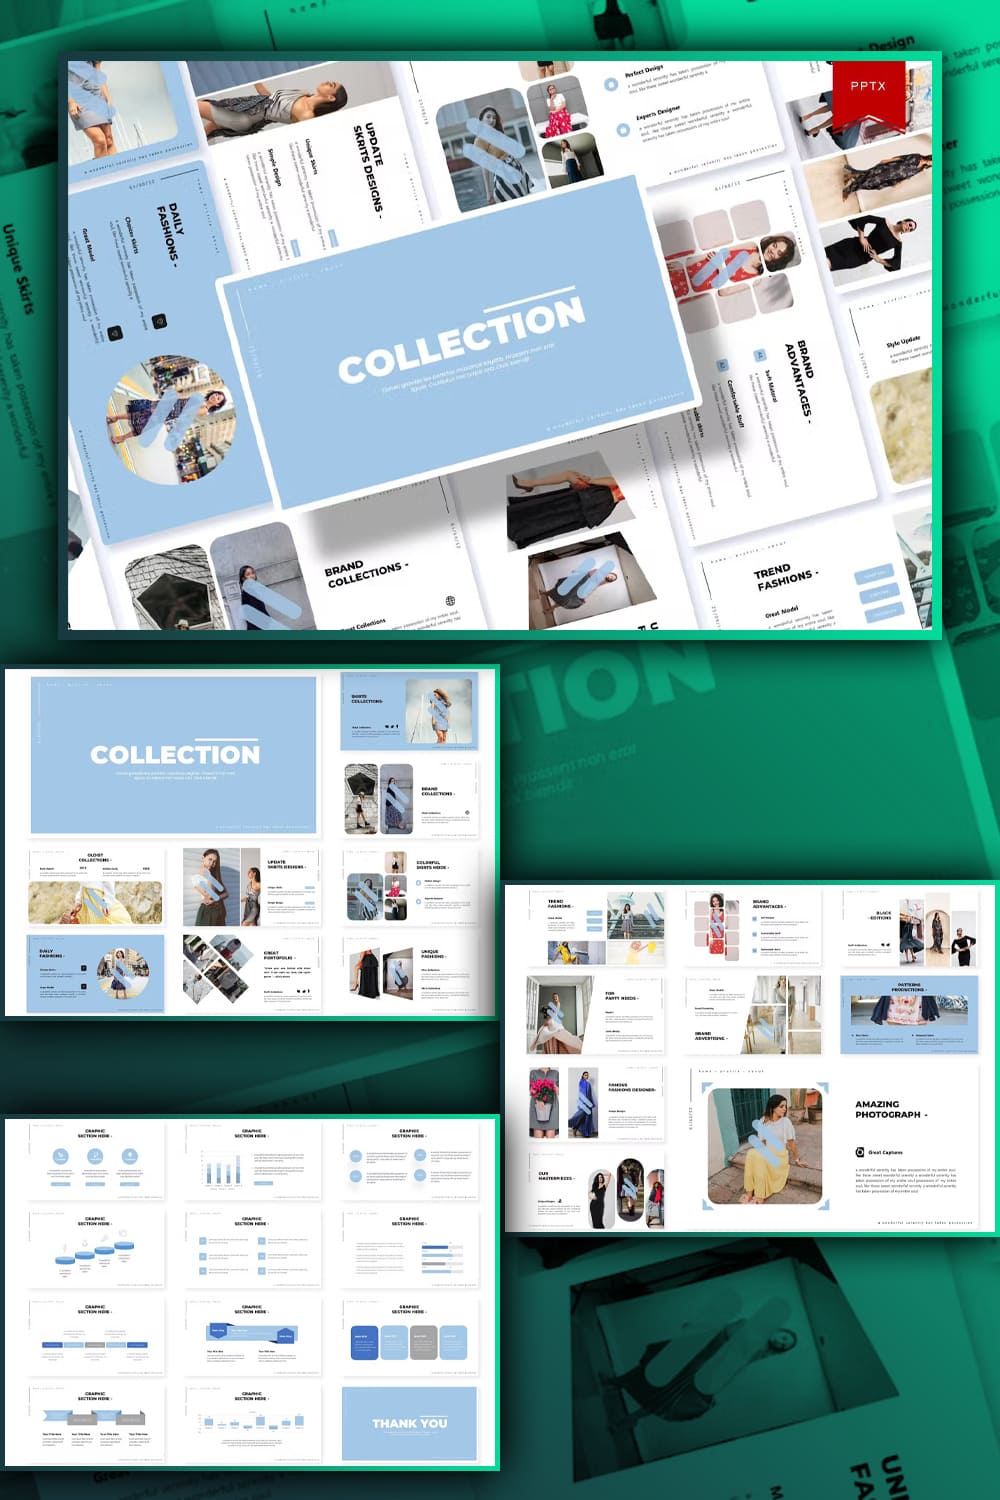 Slide about perfect design and experts designer of Collection Powerpoint template.